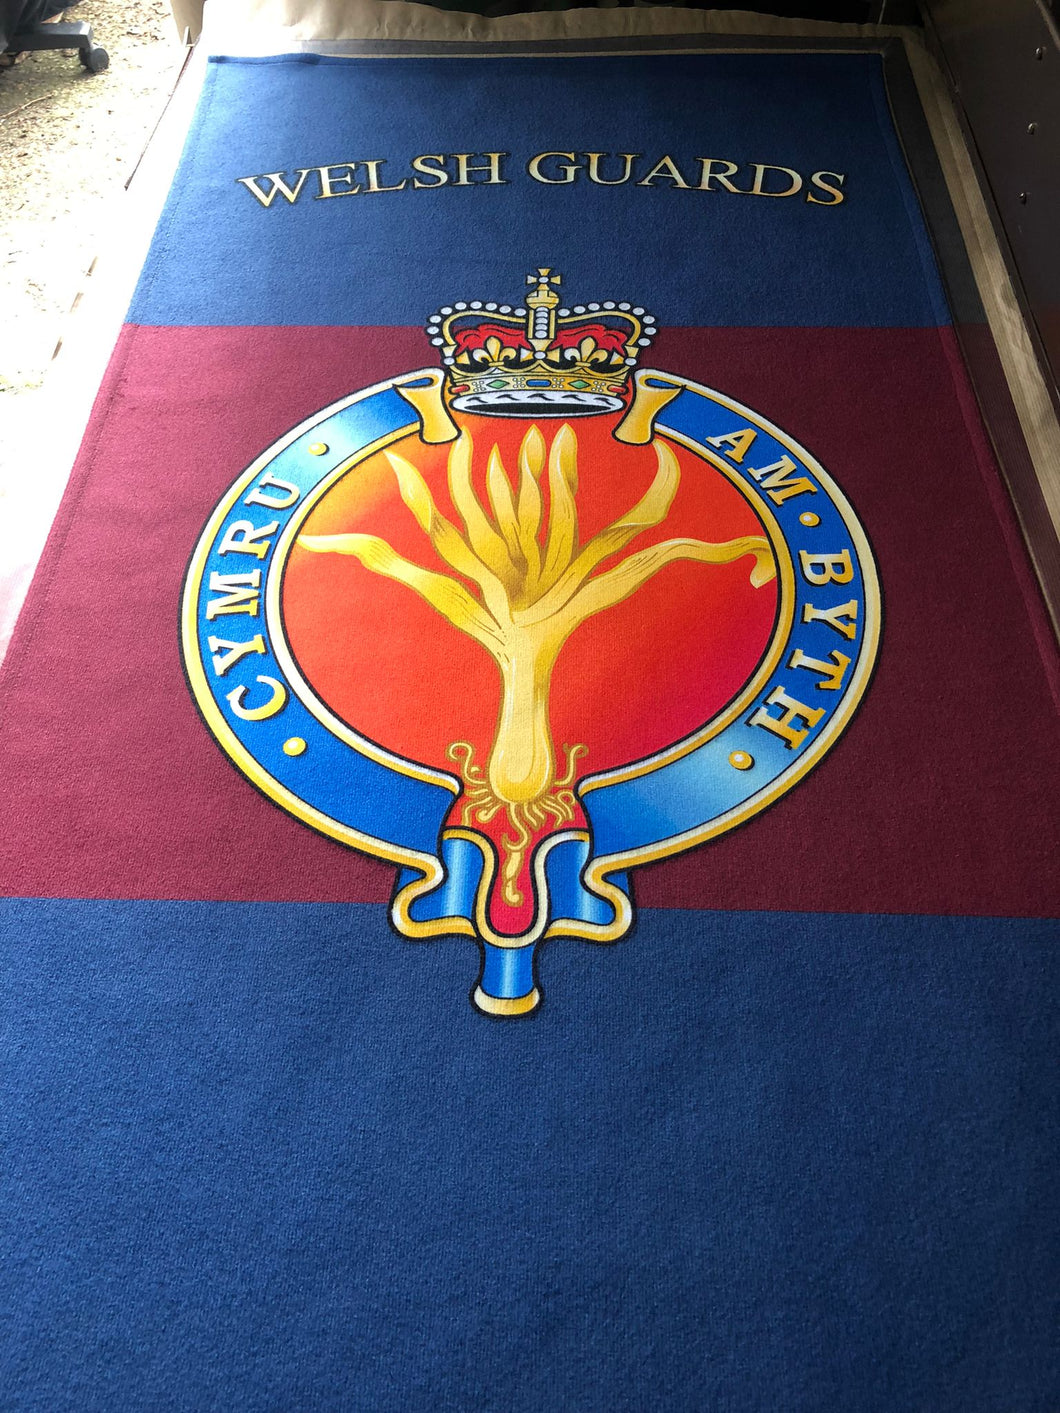 Welsh Guards  - Fully Printed Towel